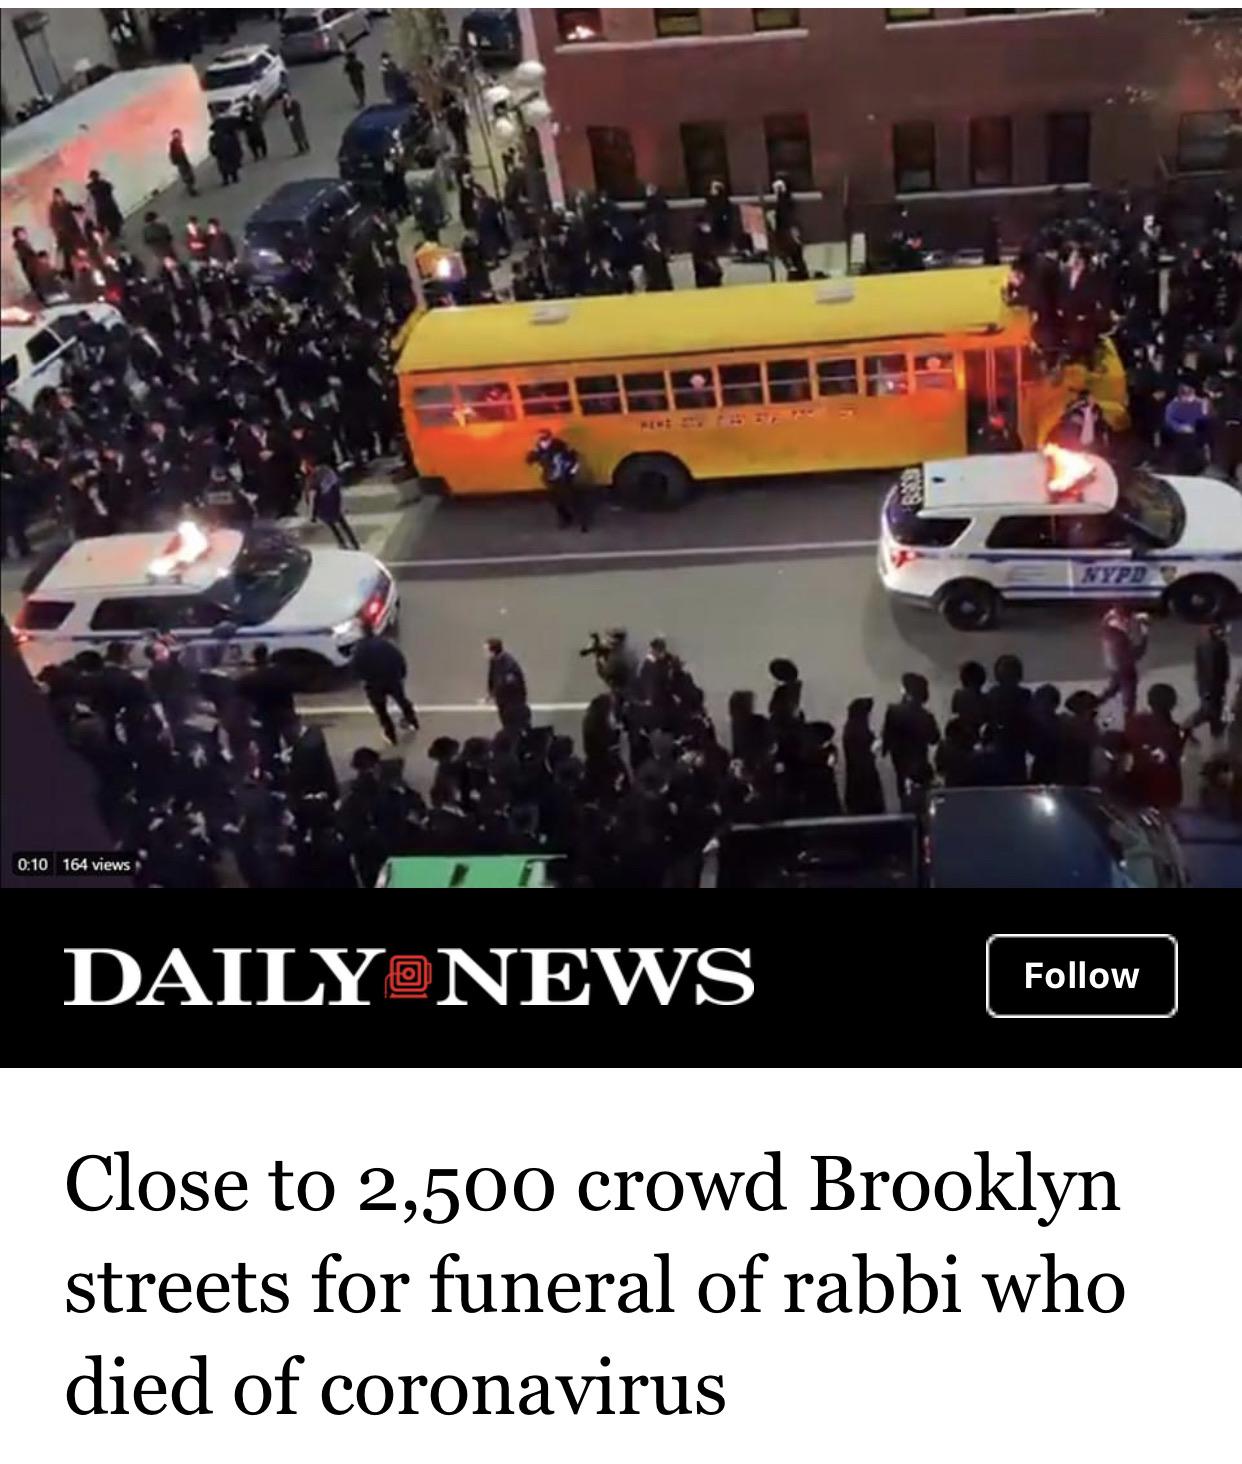 nyc jewish funeral - Spd 164 views Daily News Close to 2,500 crowd Brooklyn streets for funeral of rabbi who died of coronavirus